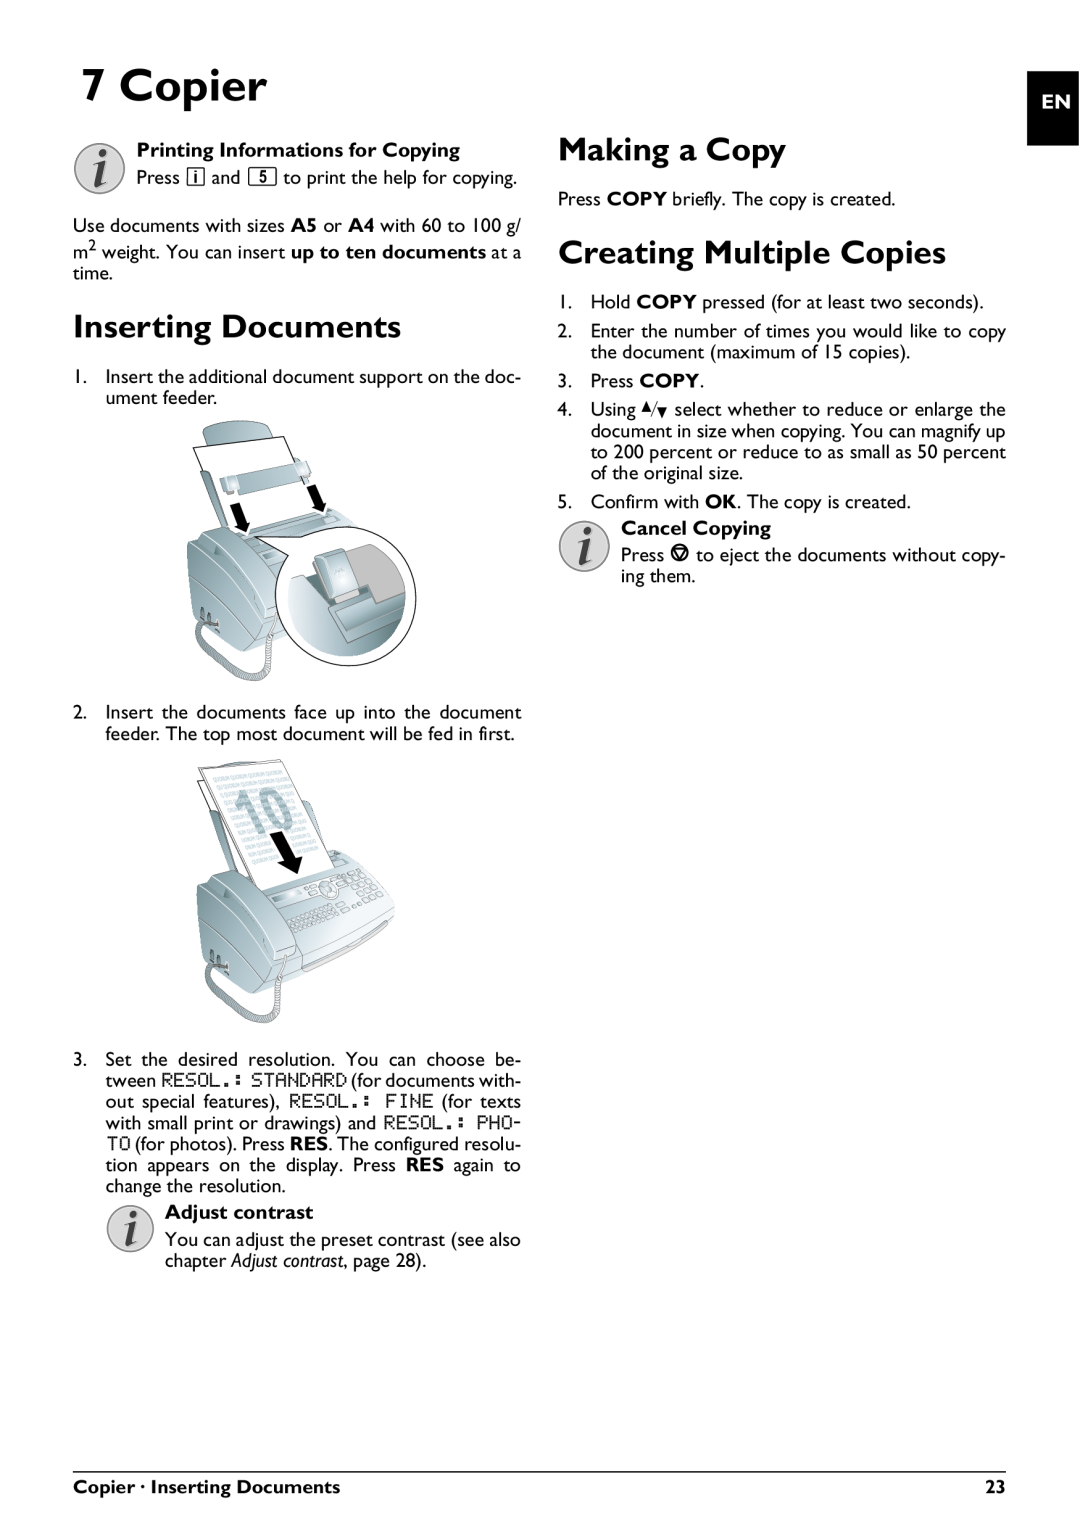 Philips PPF 725 Copier, Inserting Documents, Making a Copy, Creating Multiple Copies, Printing Informations for Copying 